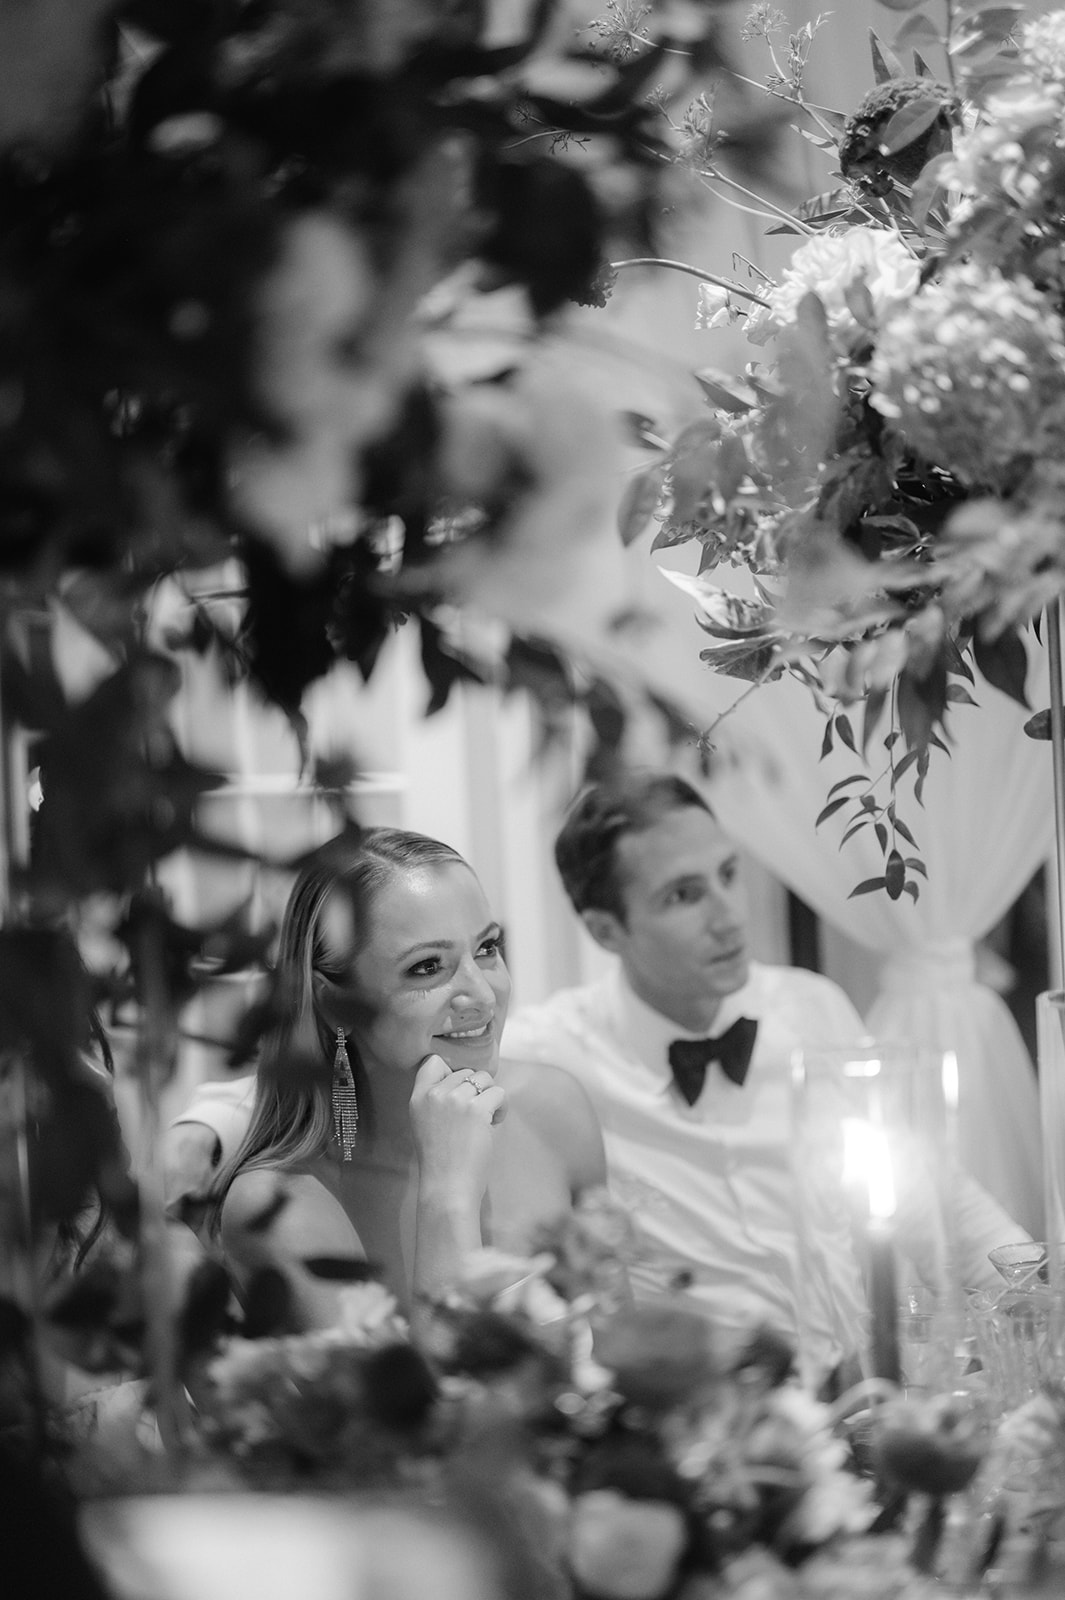 Romantic candid shot of a bride and groom listening to a heartfelt speech during their reception.